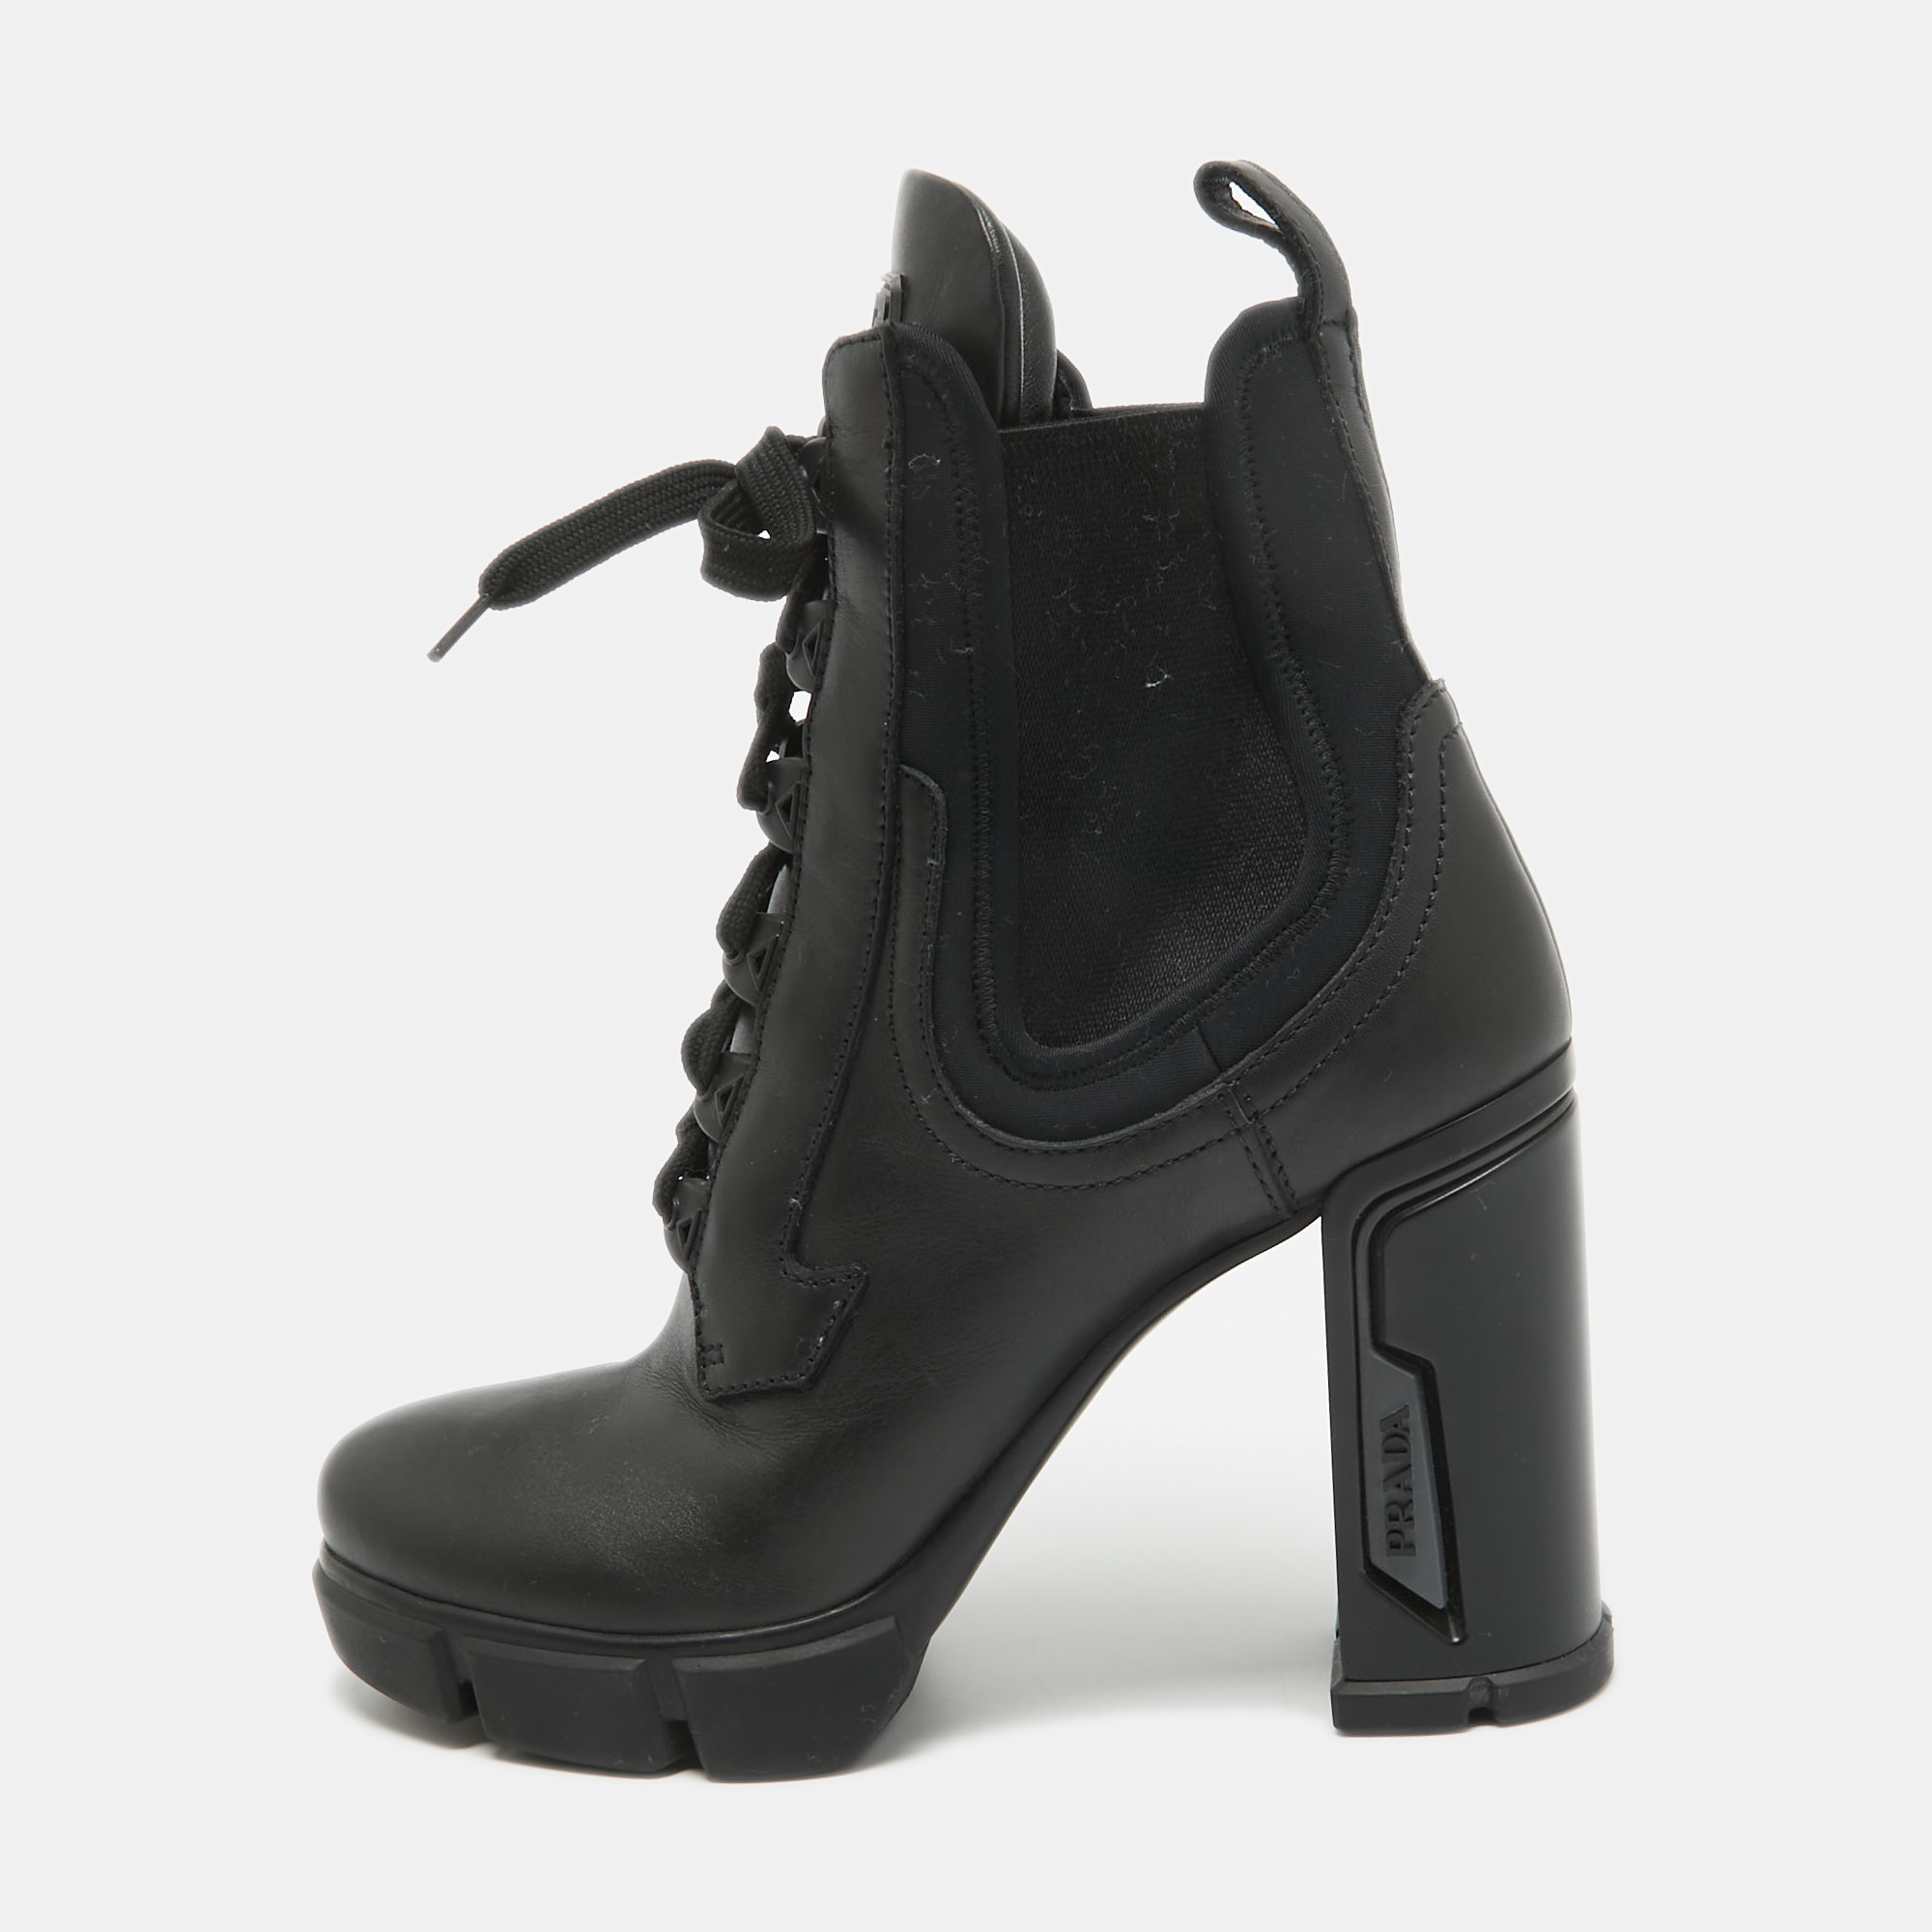 Prada black leather and neopreme block heel ankle boots size 39